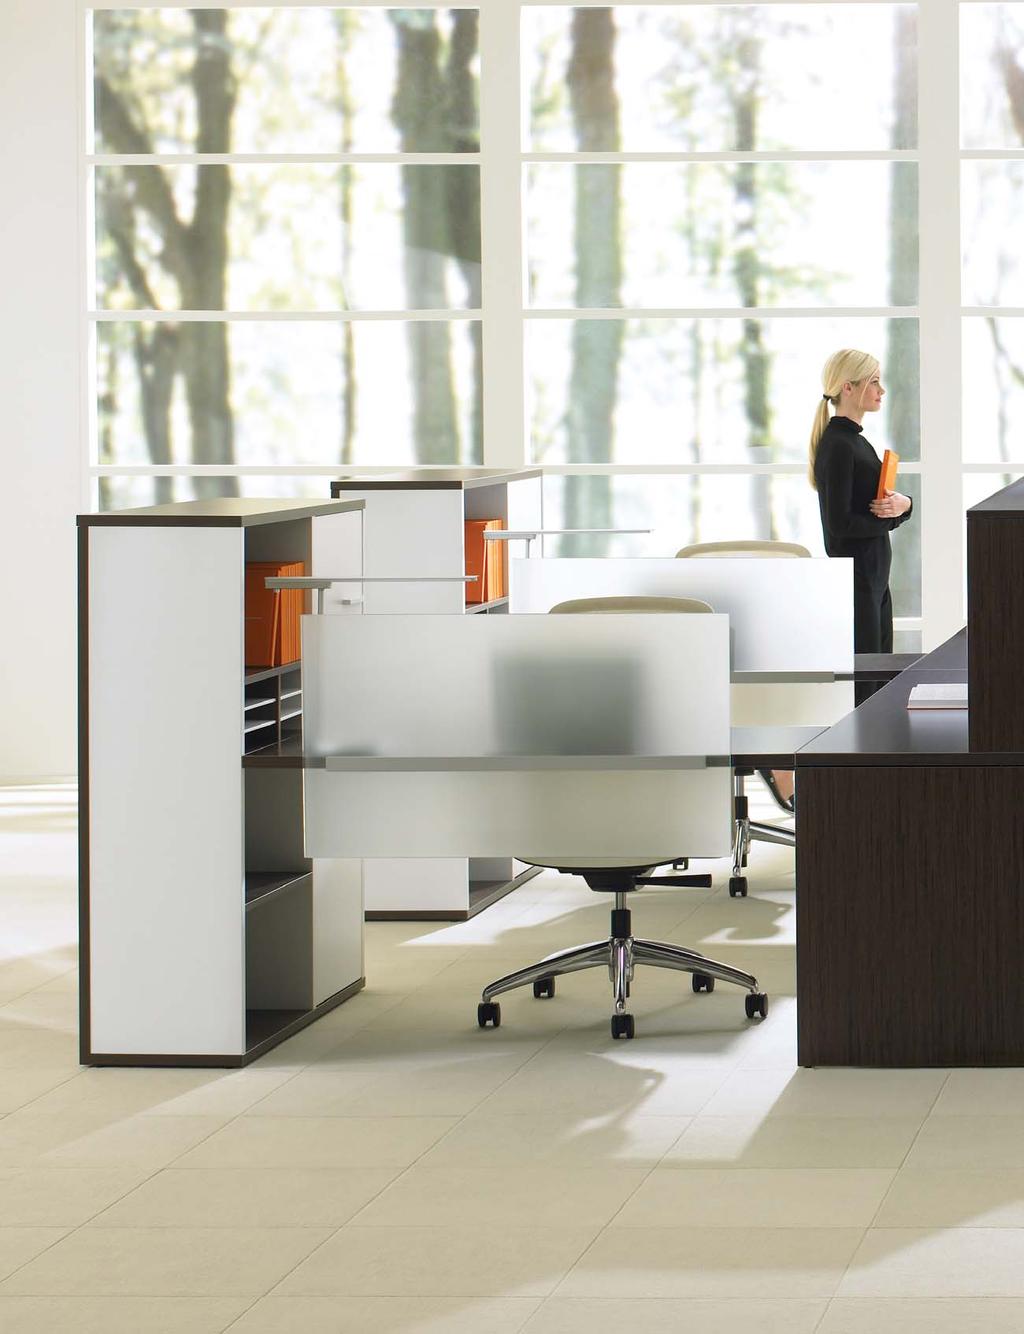 A full collection of storage units defines space in multiple configurations.